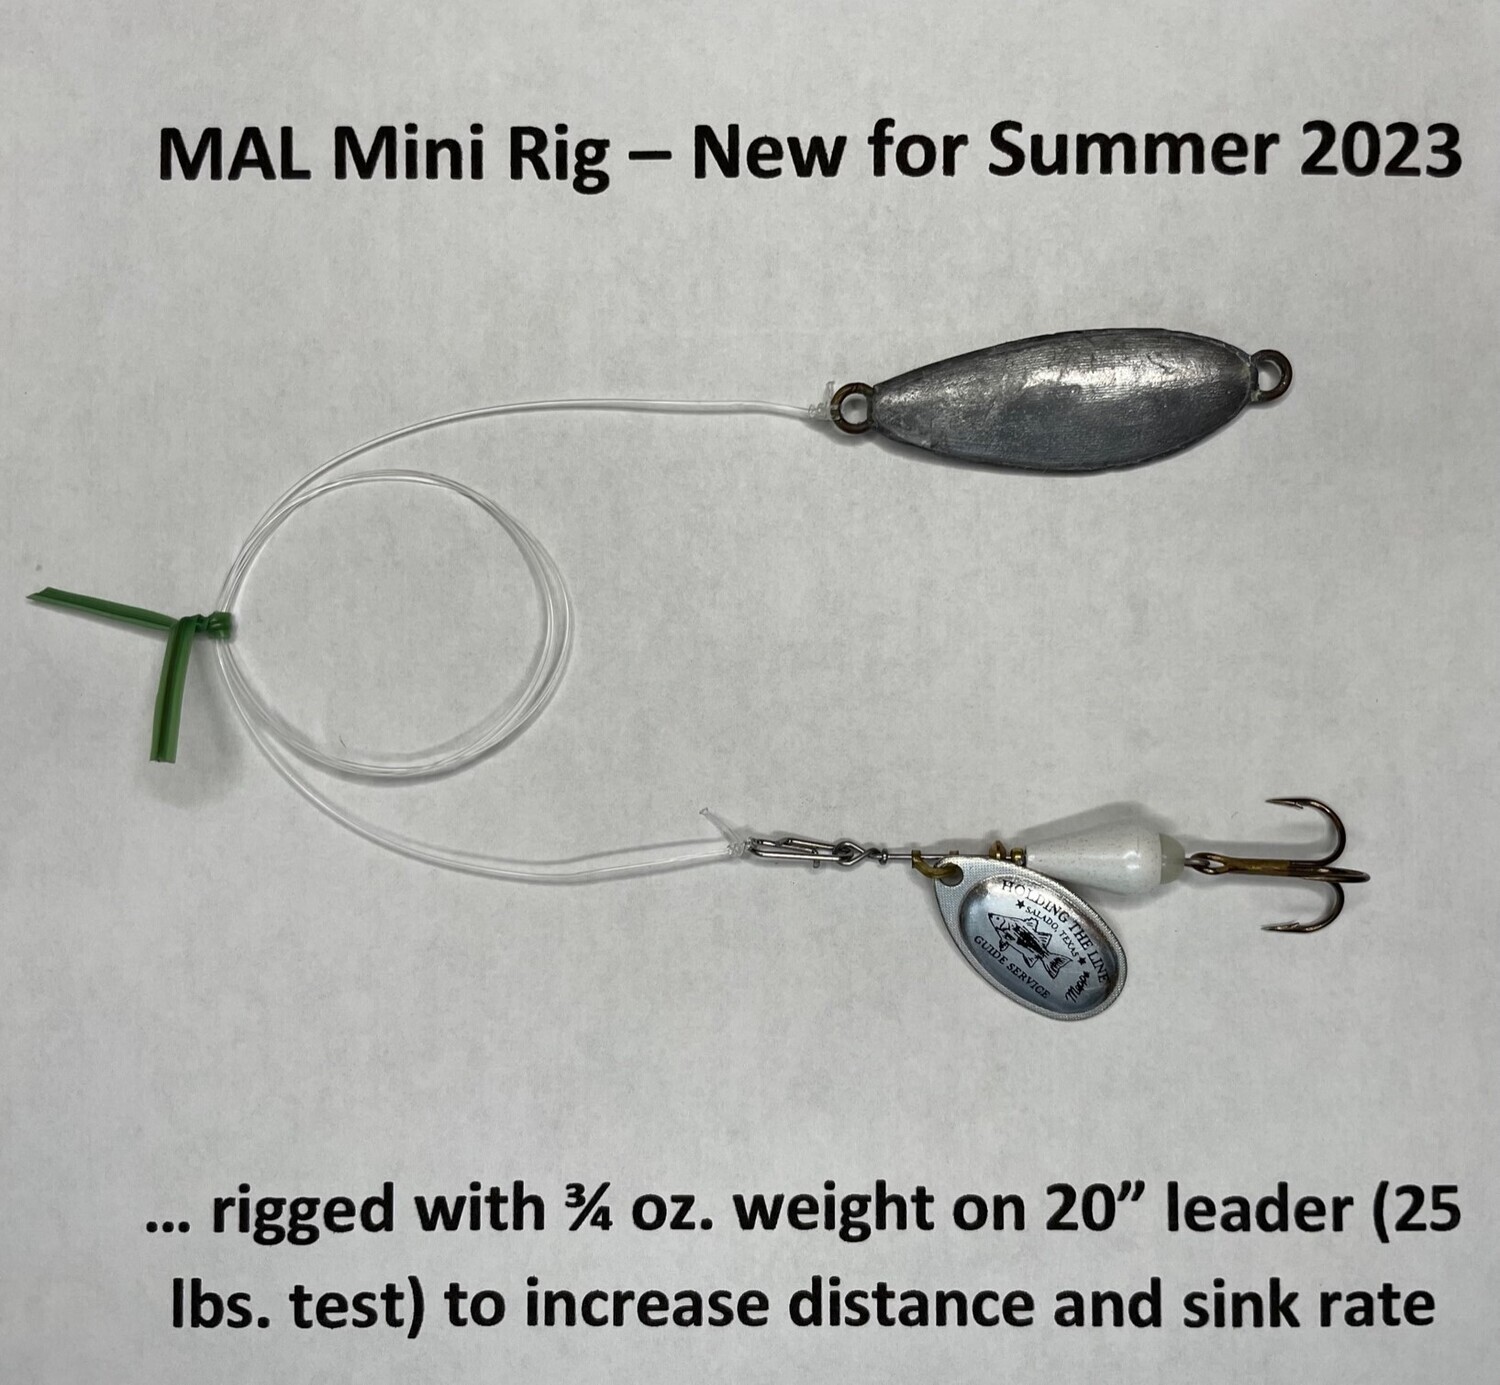 A6. MAL MINI RIG (Designed to imitate small young-of-the-year shad for tough, summertime situations)